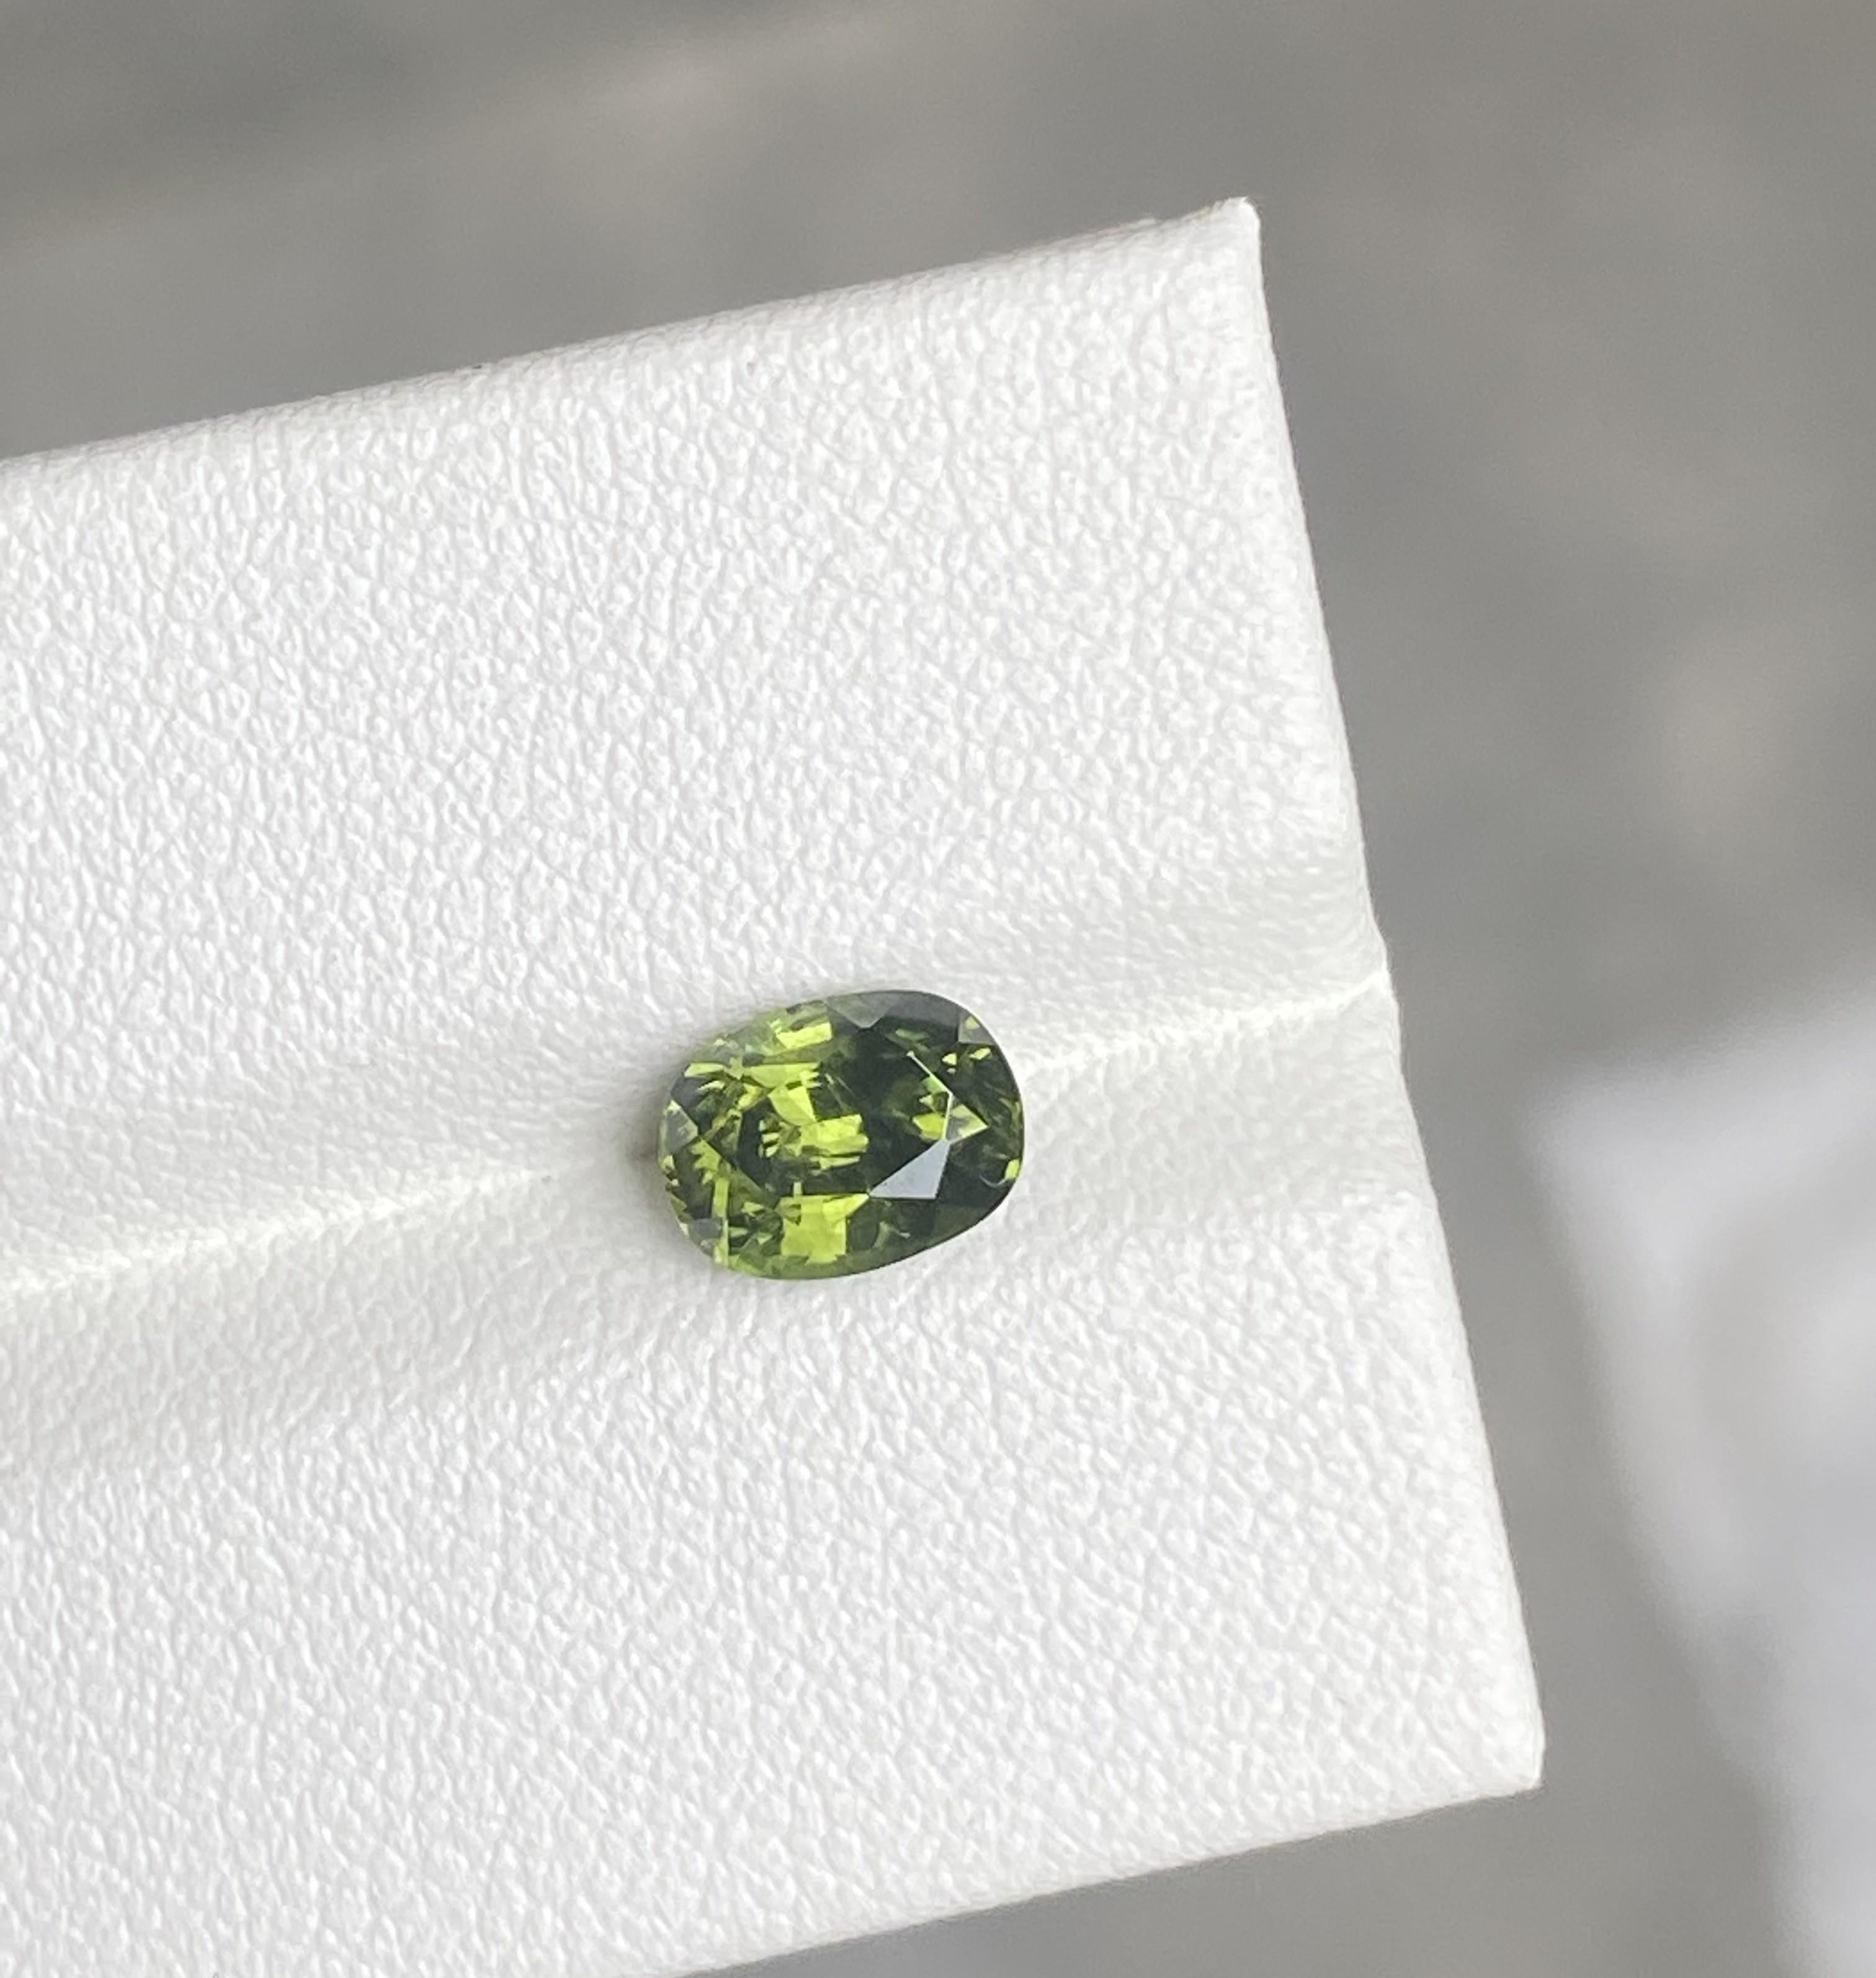 Natural Green Zircon 1.50 Carats unheated come with a rich Green color and luster and perfect cut, unheated 

• Variety: Zircon
• Origin: Sri Lanka (Ceylon)
• Color(s): Green
• Shape/Cutting Style: Cushion
• Dimensions: 8.1mm x 7mm x 5.2mm
•